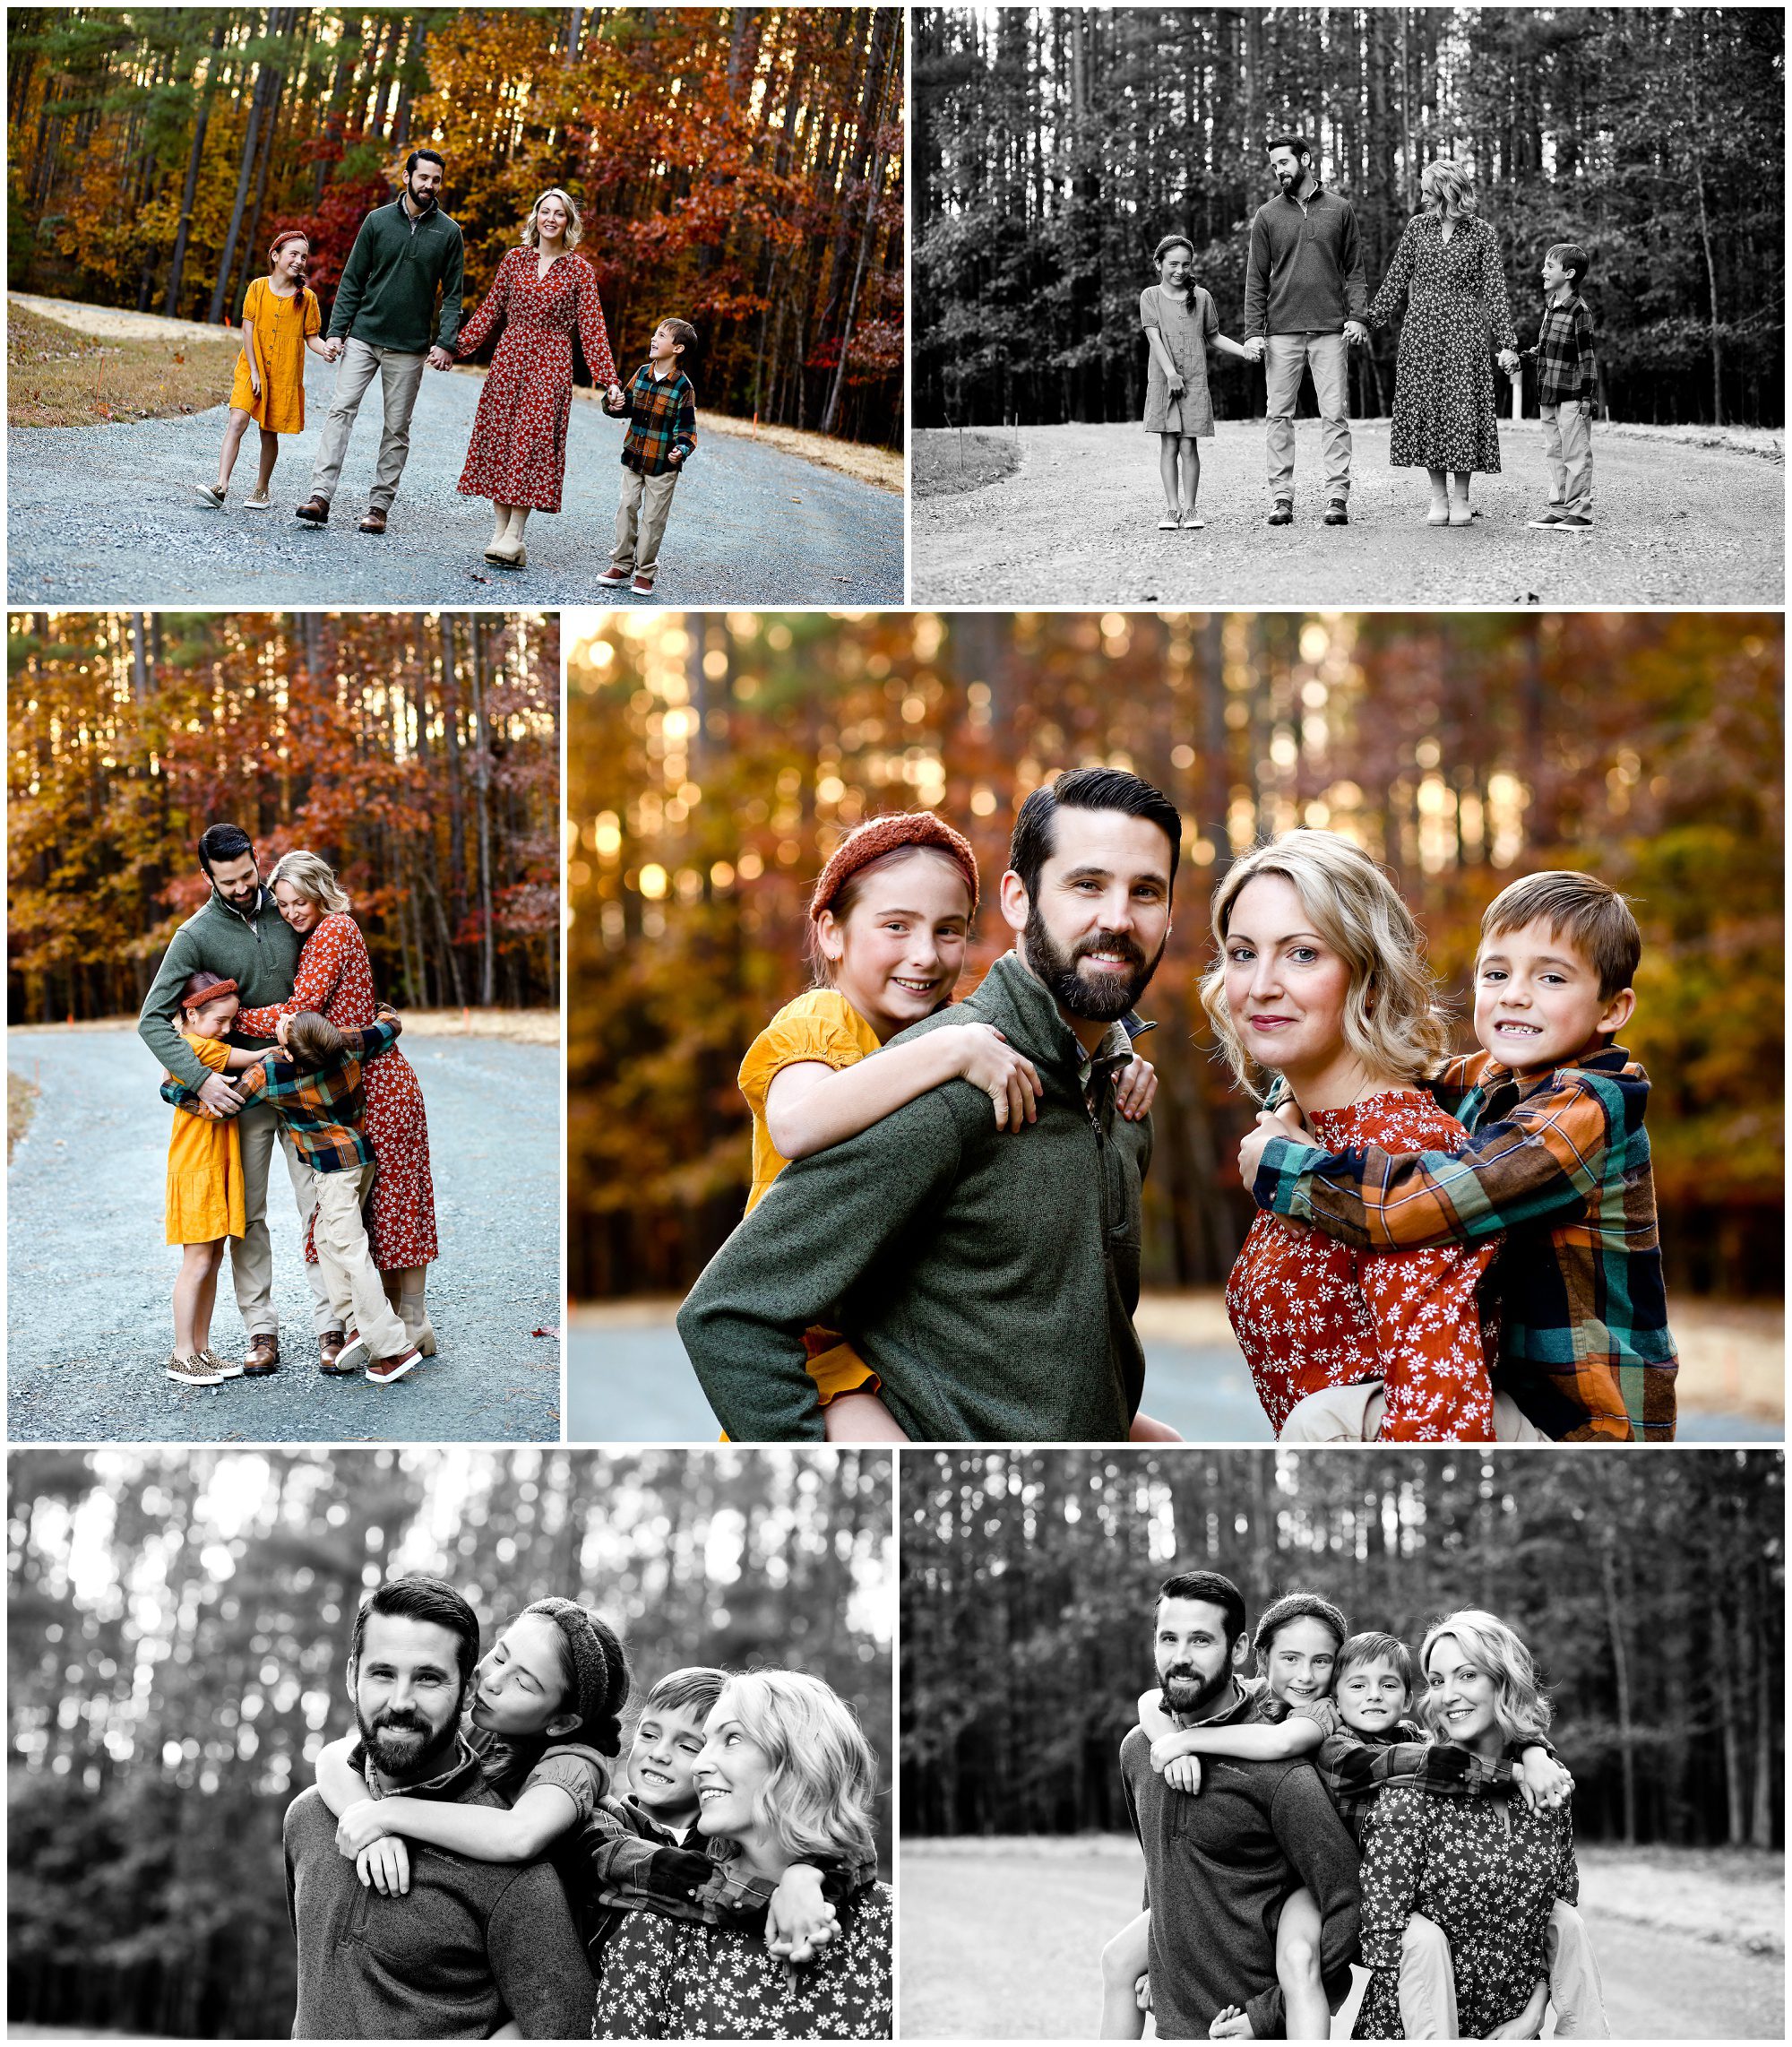 Fluvanna Family Fall Portraits at Home Charlottesville Photographer Pictures Photoshoot Cville Virginia Photography Siblings Residence Rural Autumn House